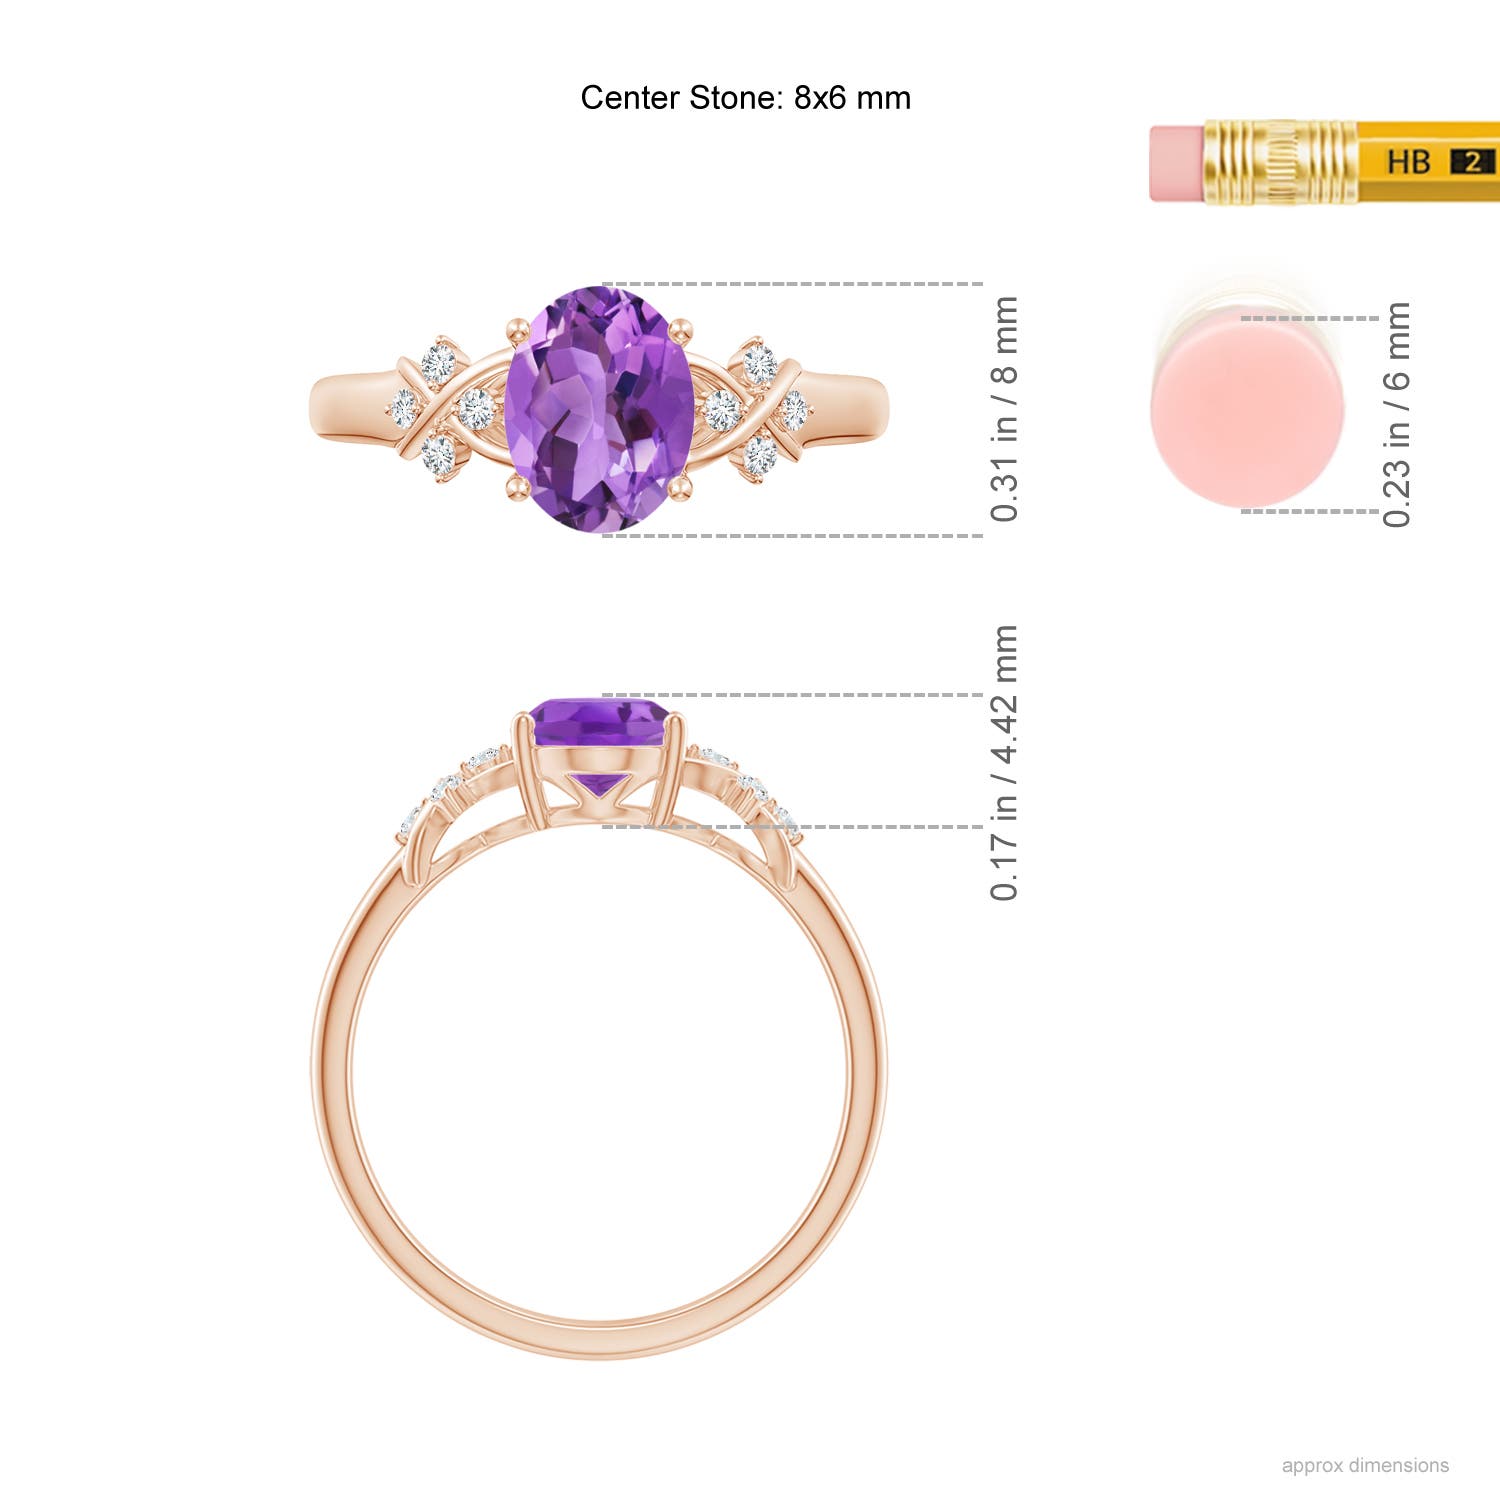 AA - Amethyst / 1.23 CT / 14 KT Rose Gold